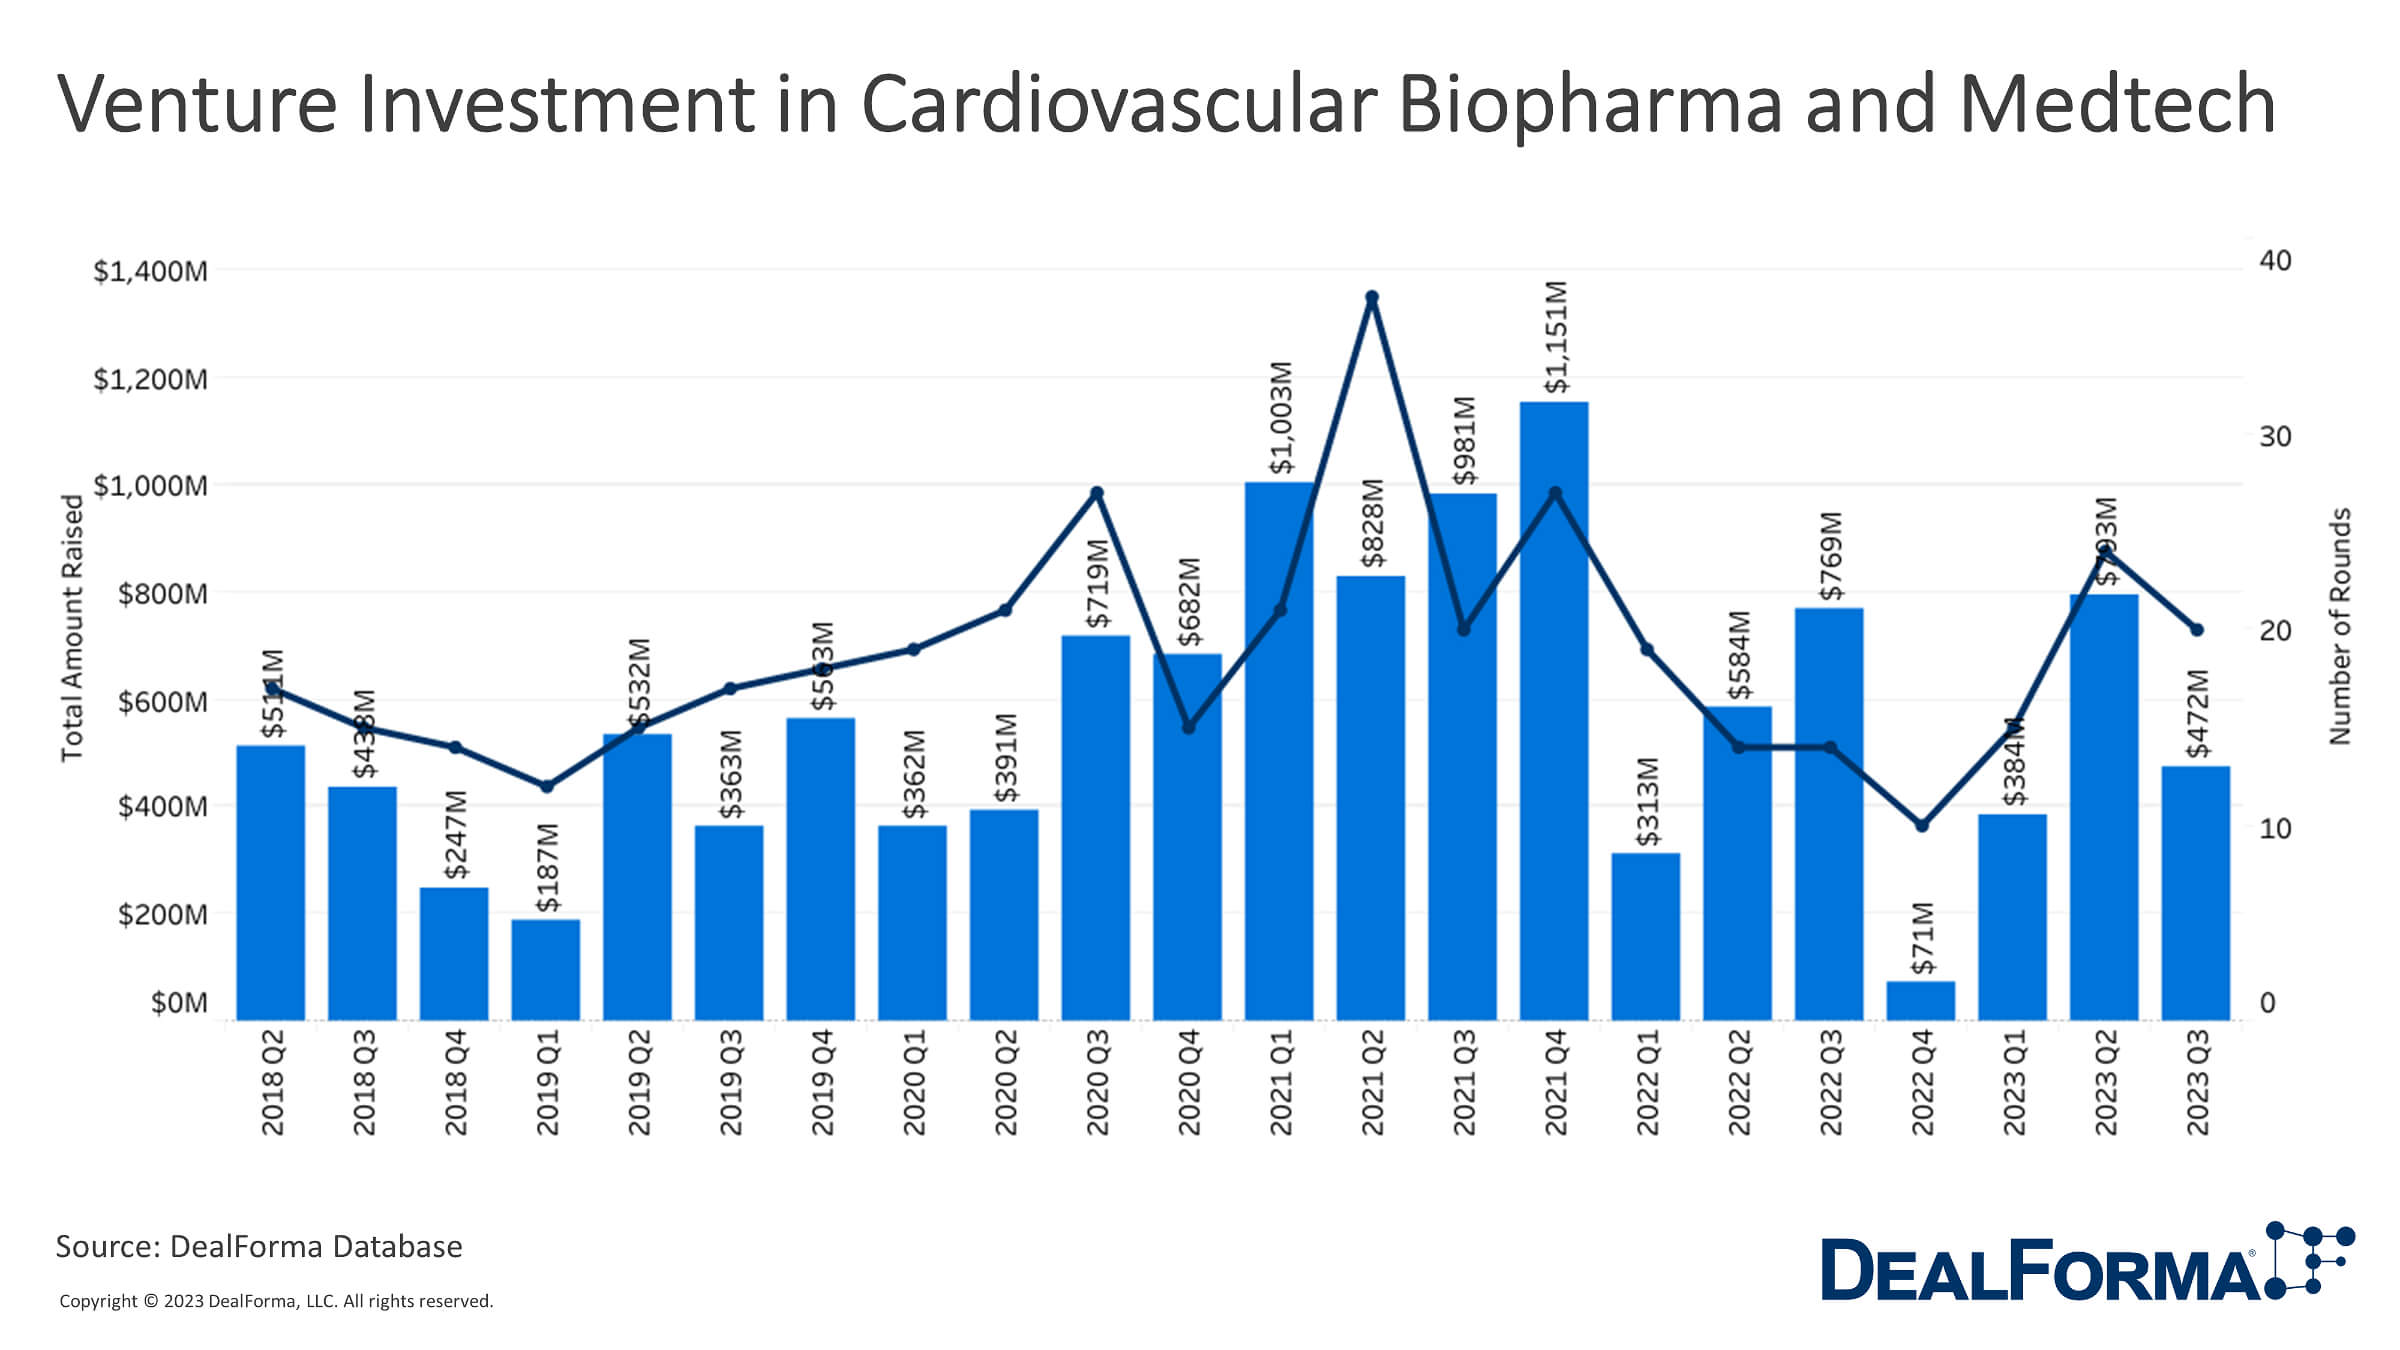 Venture Investment in Cardiovascular Biopharma and Medtech